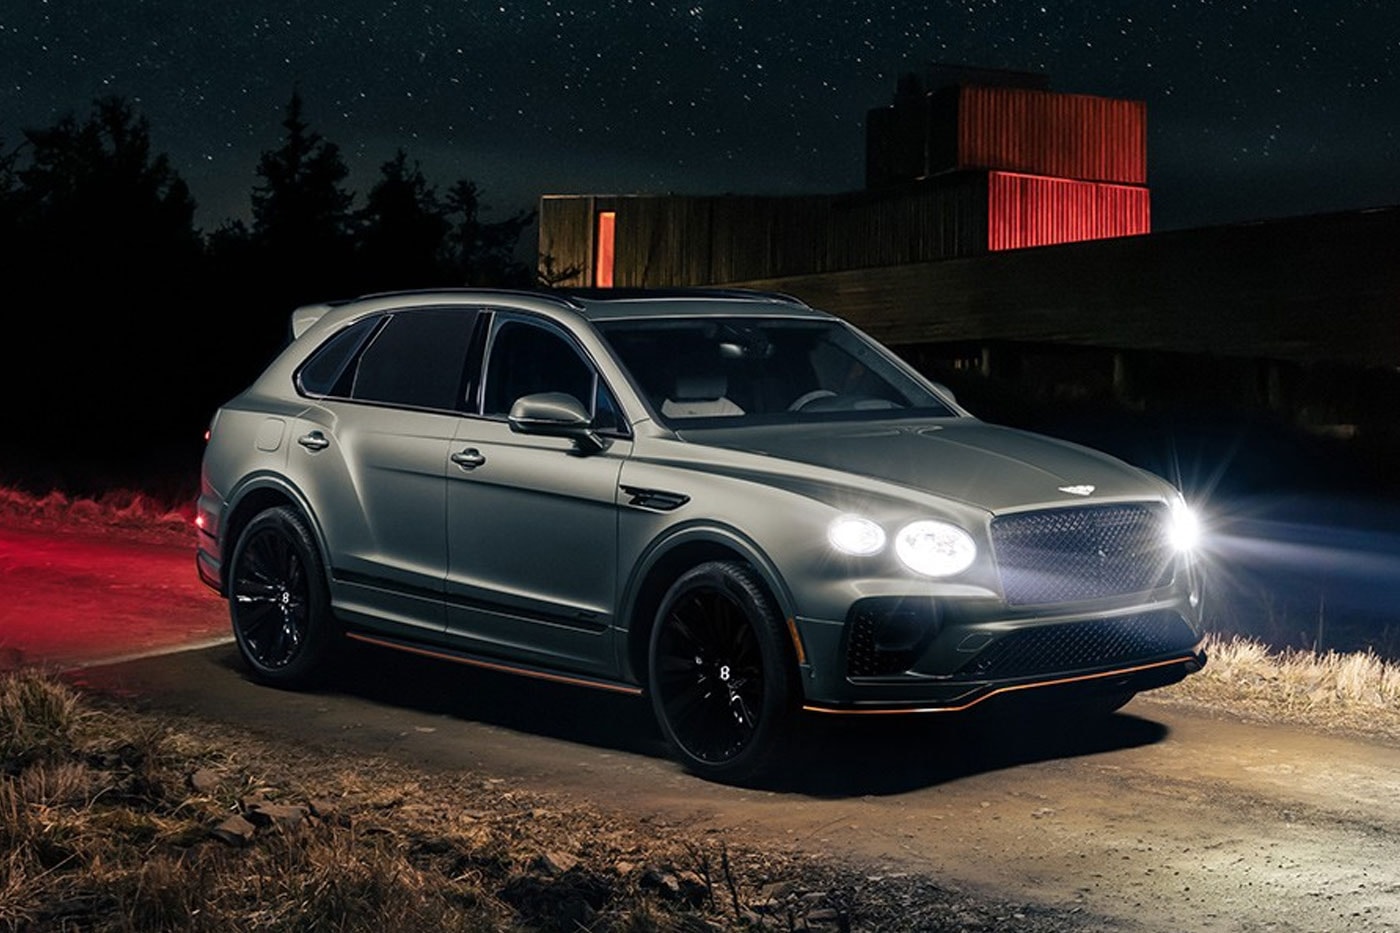 The 2022 Bentley Bentayga Receives a Bespoke Mulliner "Space Edition" one of one cypress beluga porpoise night sky